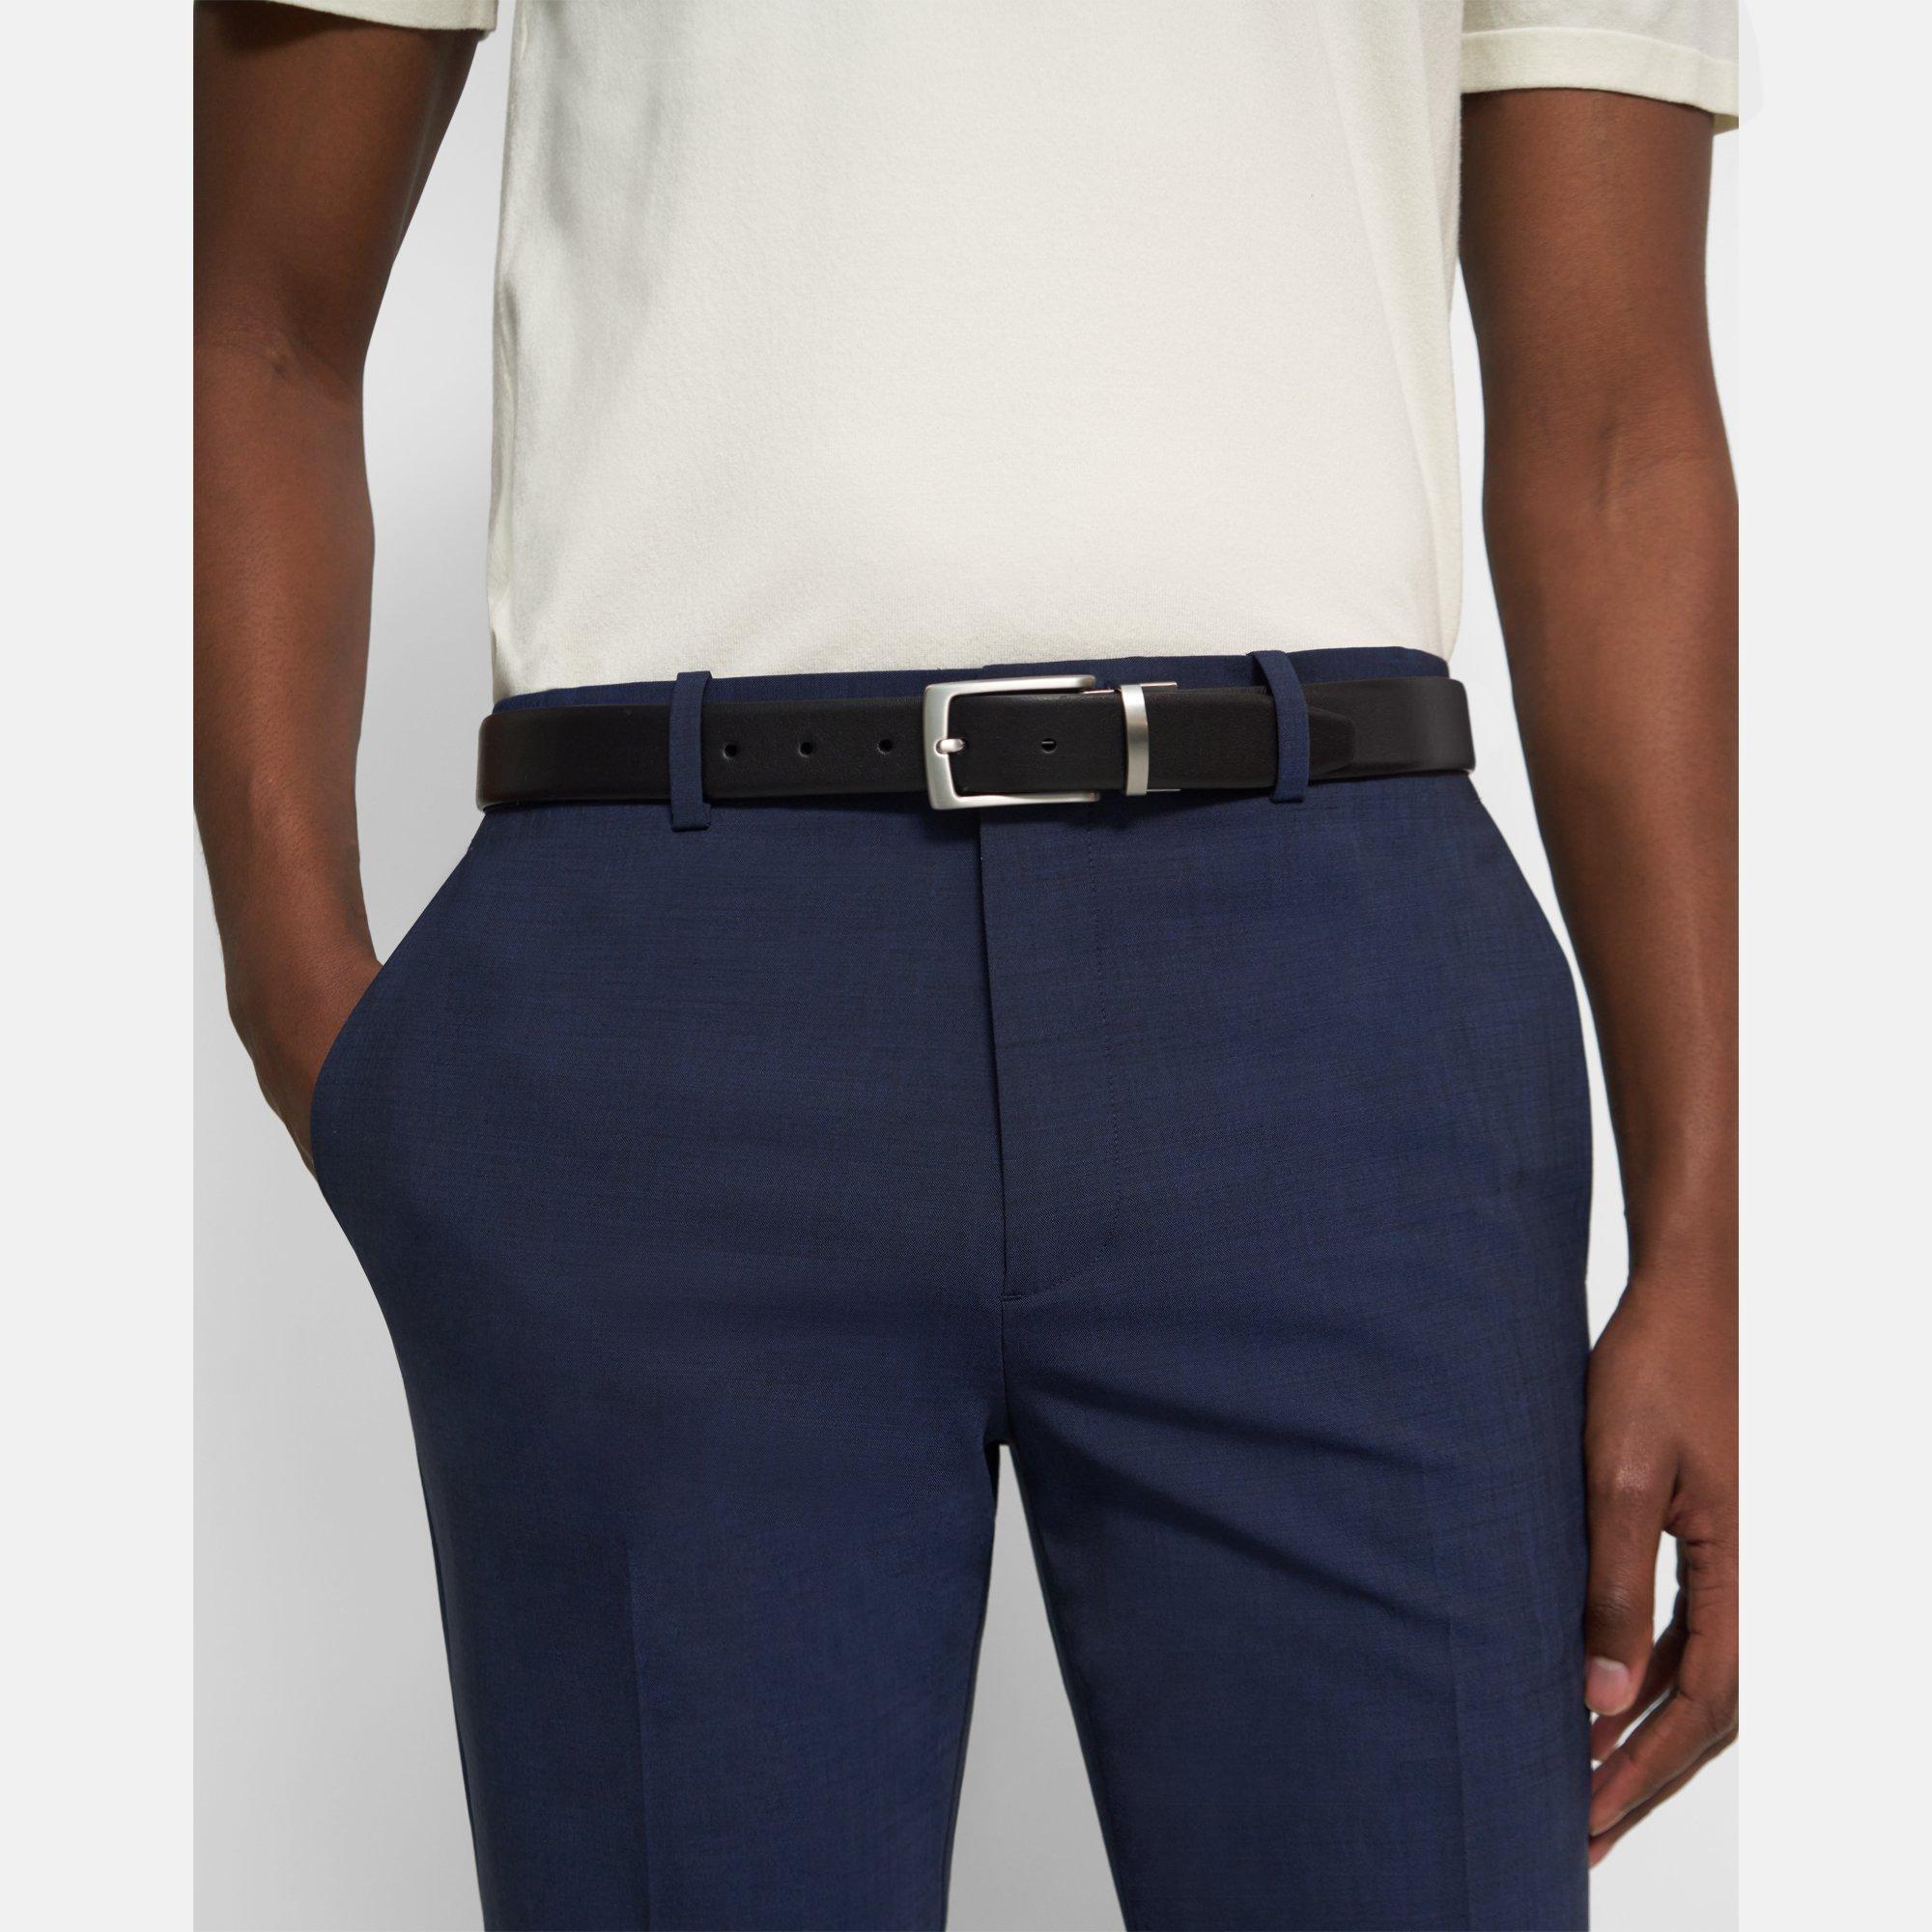 Theory Abhy Reversible Belt in Pebbled Leather